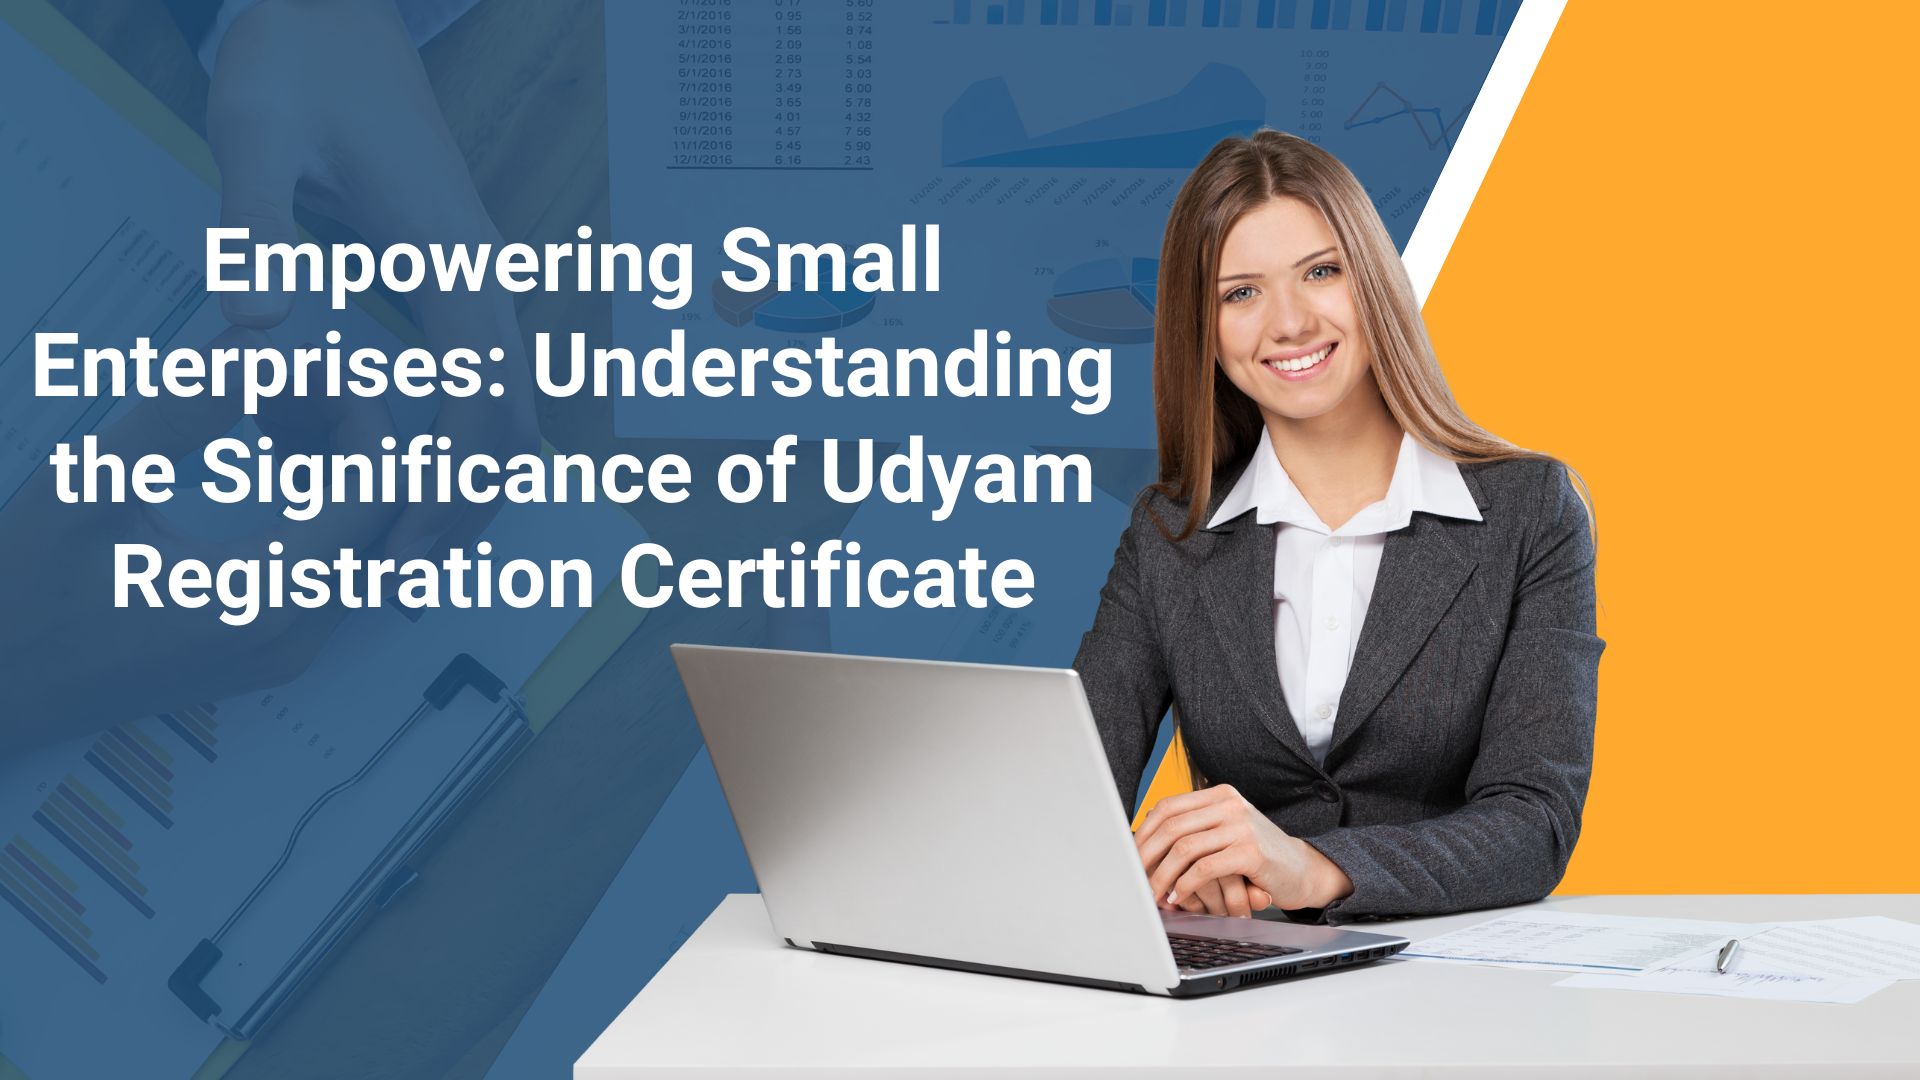 Empowering Small Enterprises: Understanding the Significance of Udyam Registration Certificate